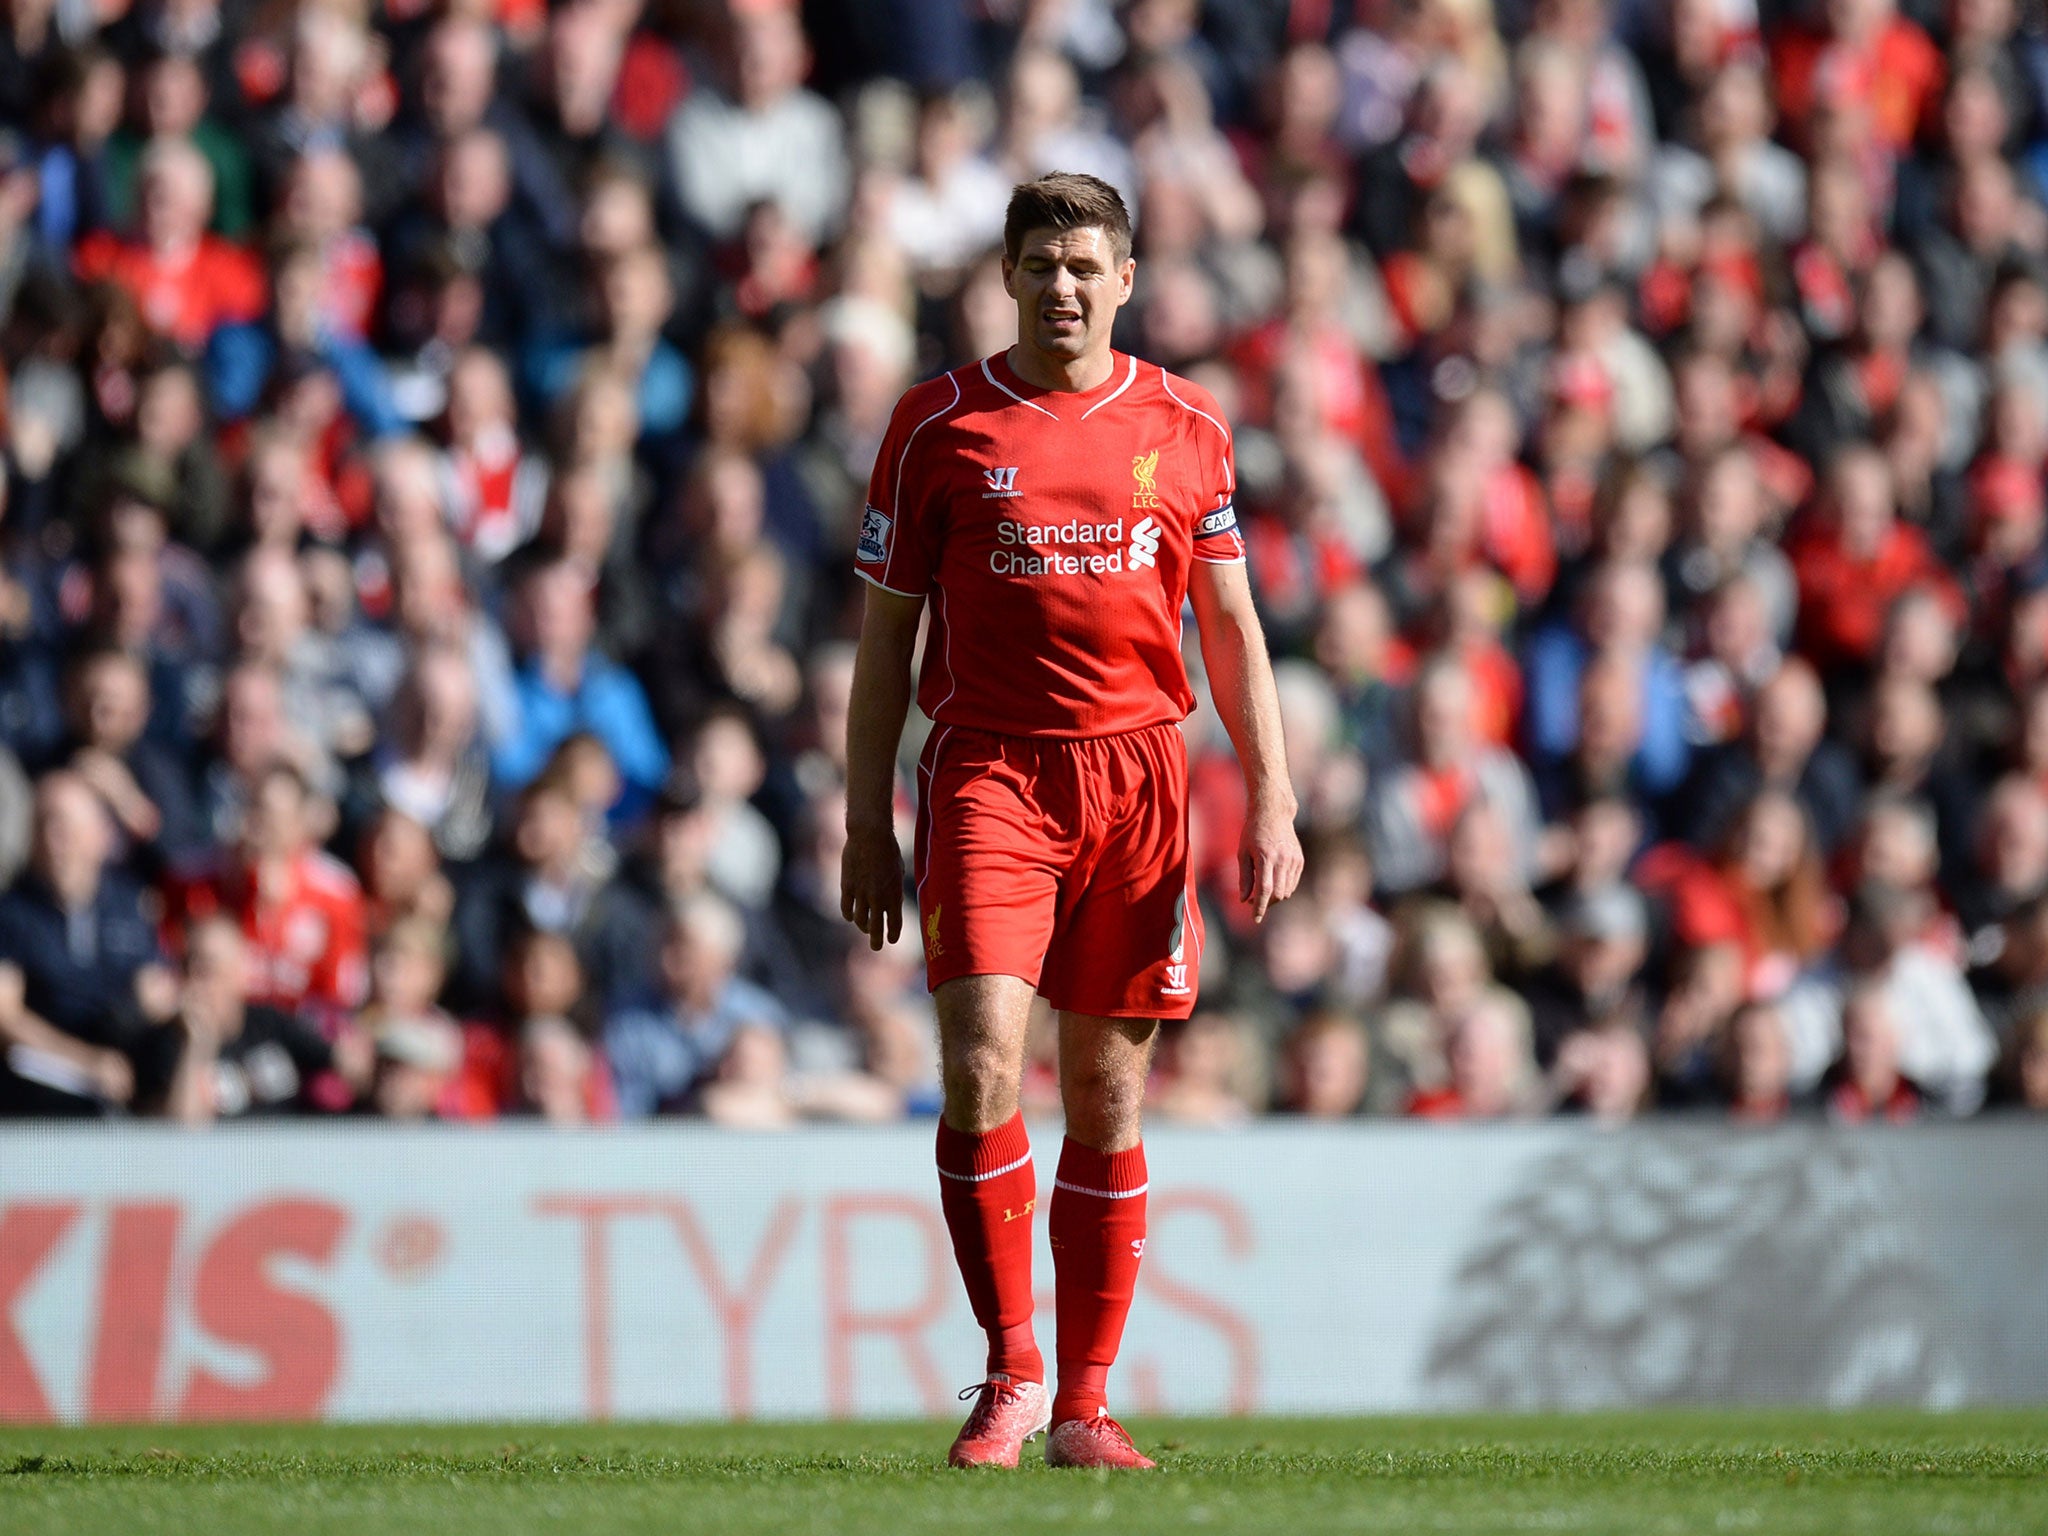 Steven Gerrard during his final appearance at Anfield